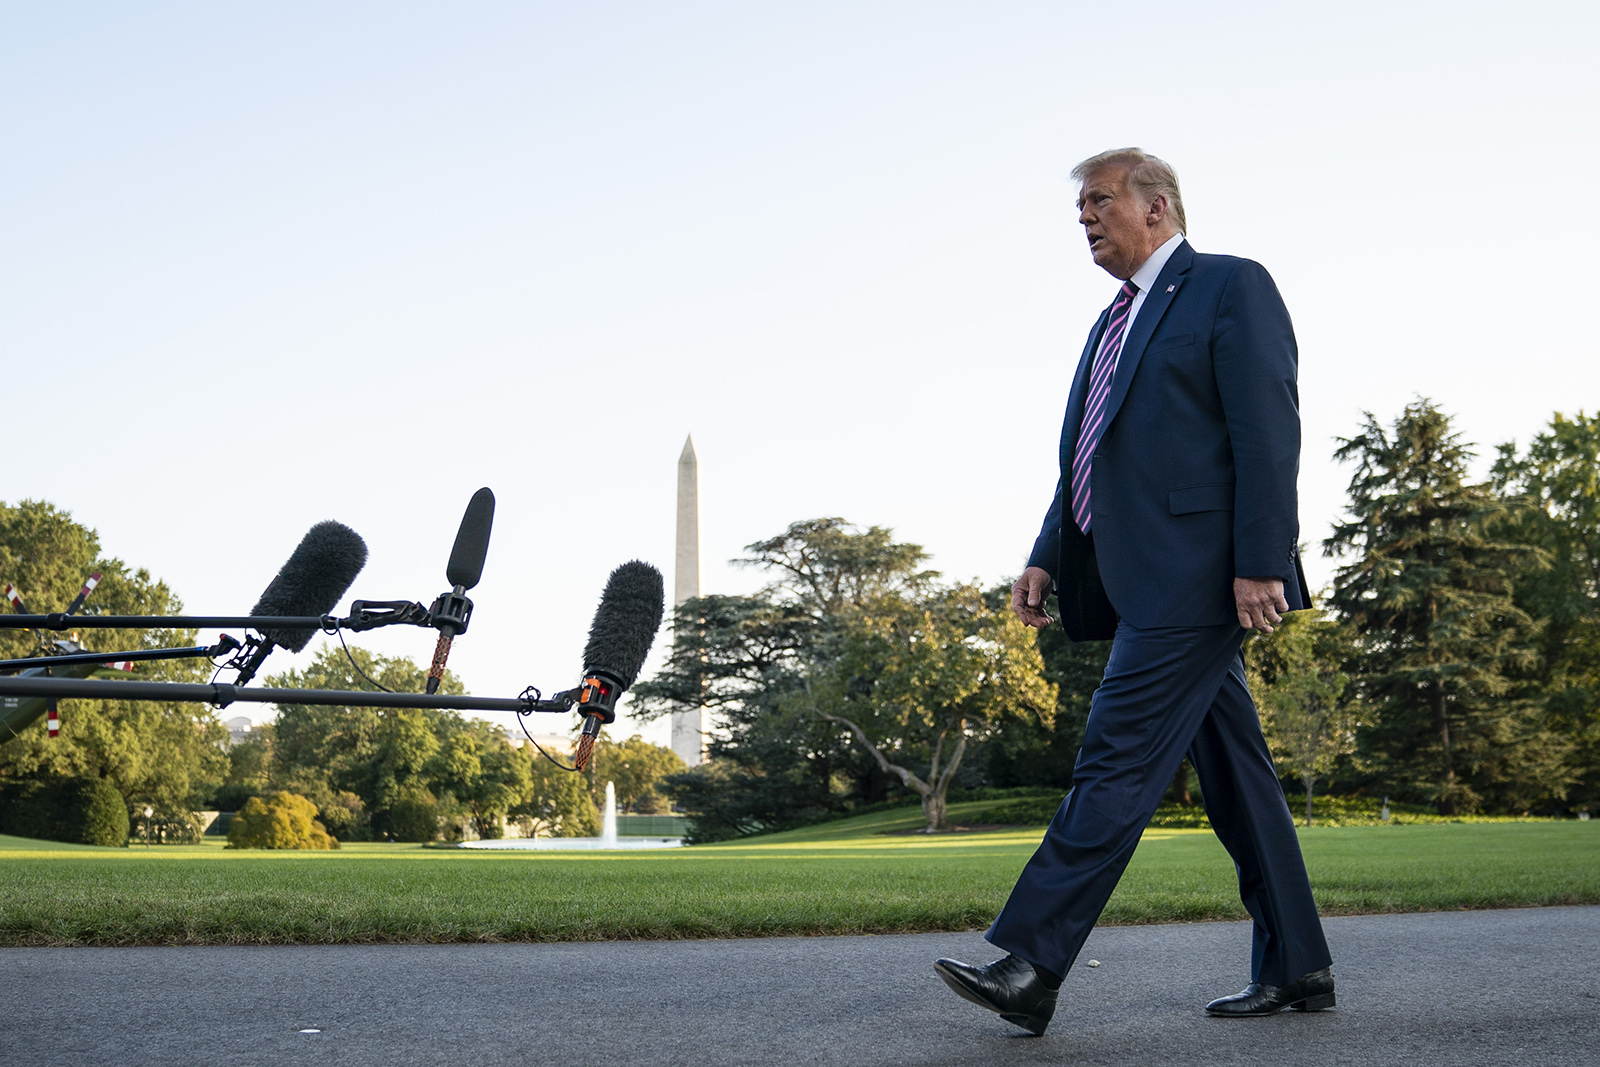 President Donald Trump stops and takes questions from reporters on his way to Marine One on the South Lawn of the White House on September 22, in Washington.